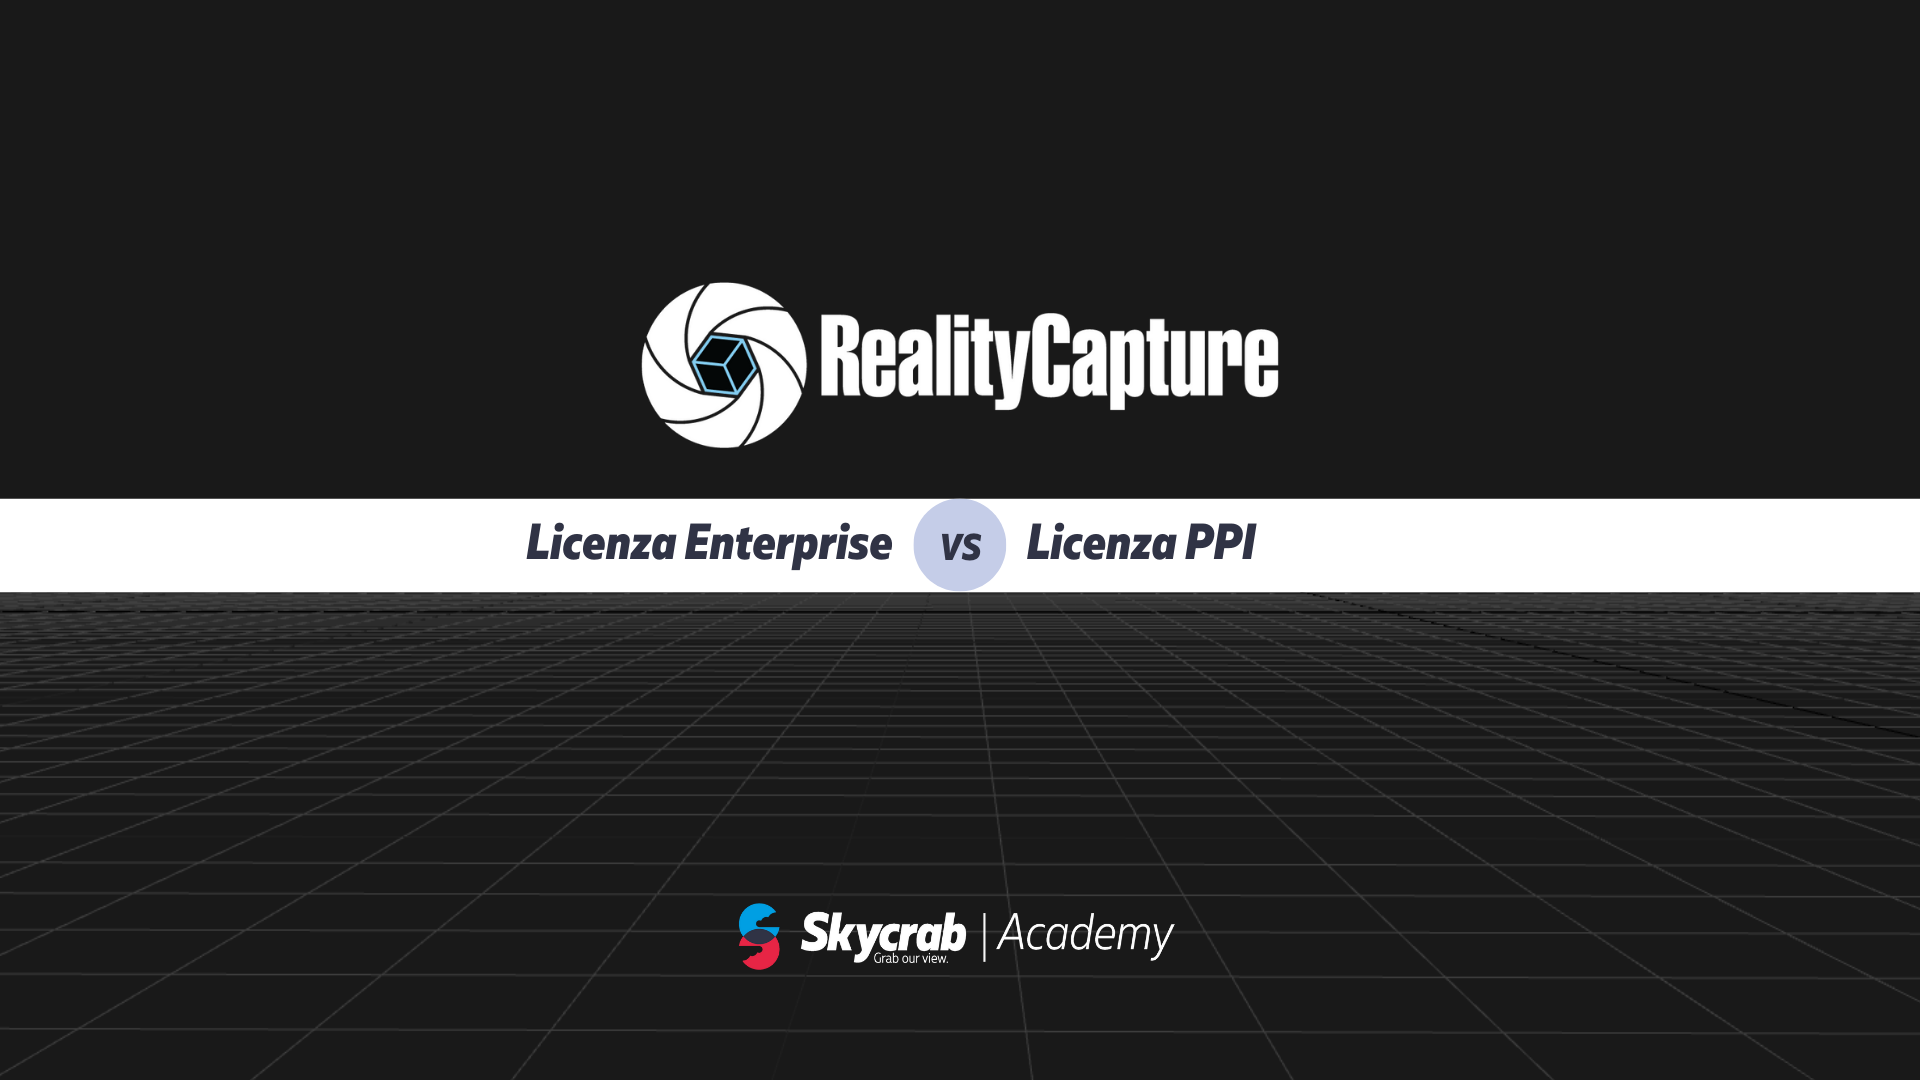 Reality Capture licenze